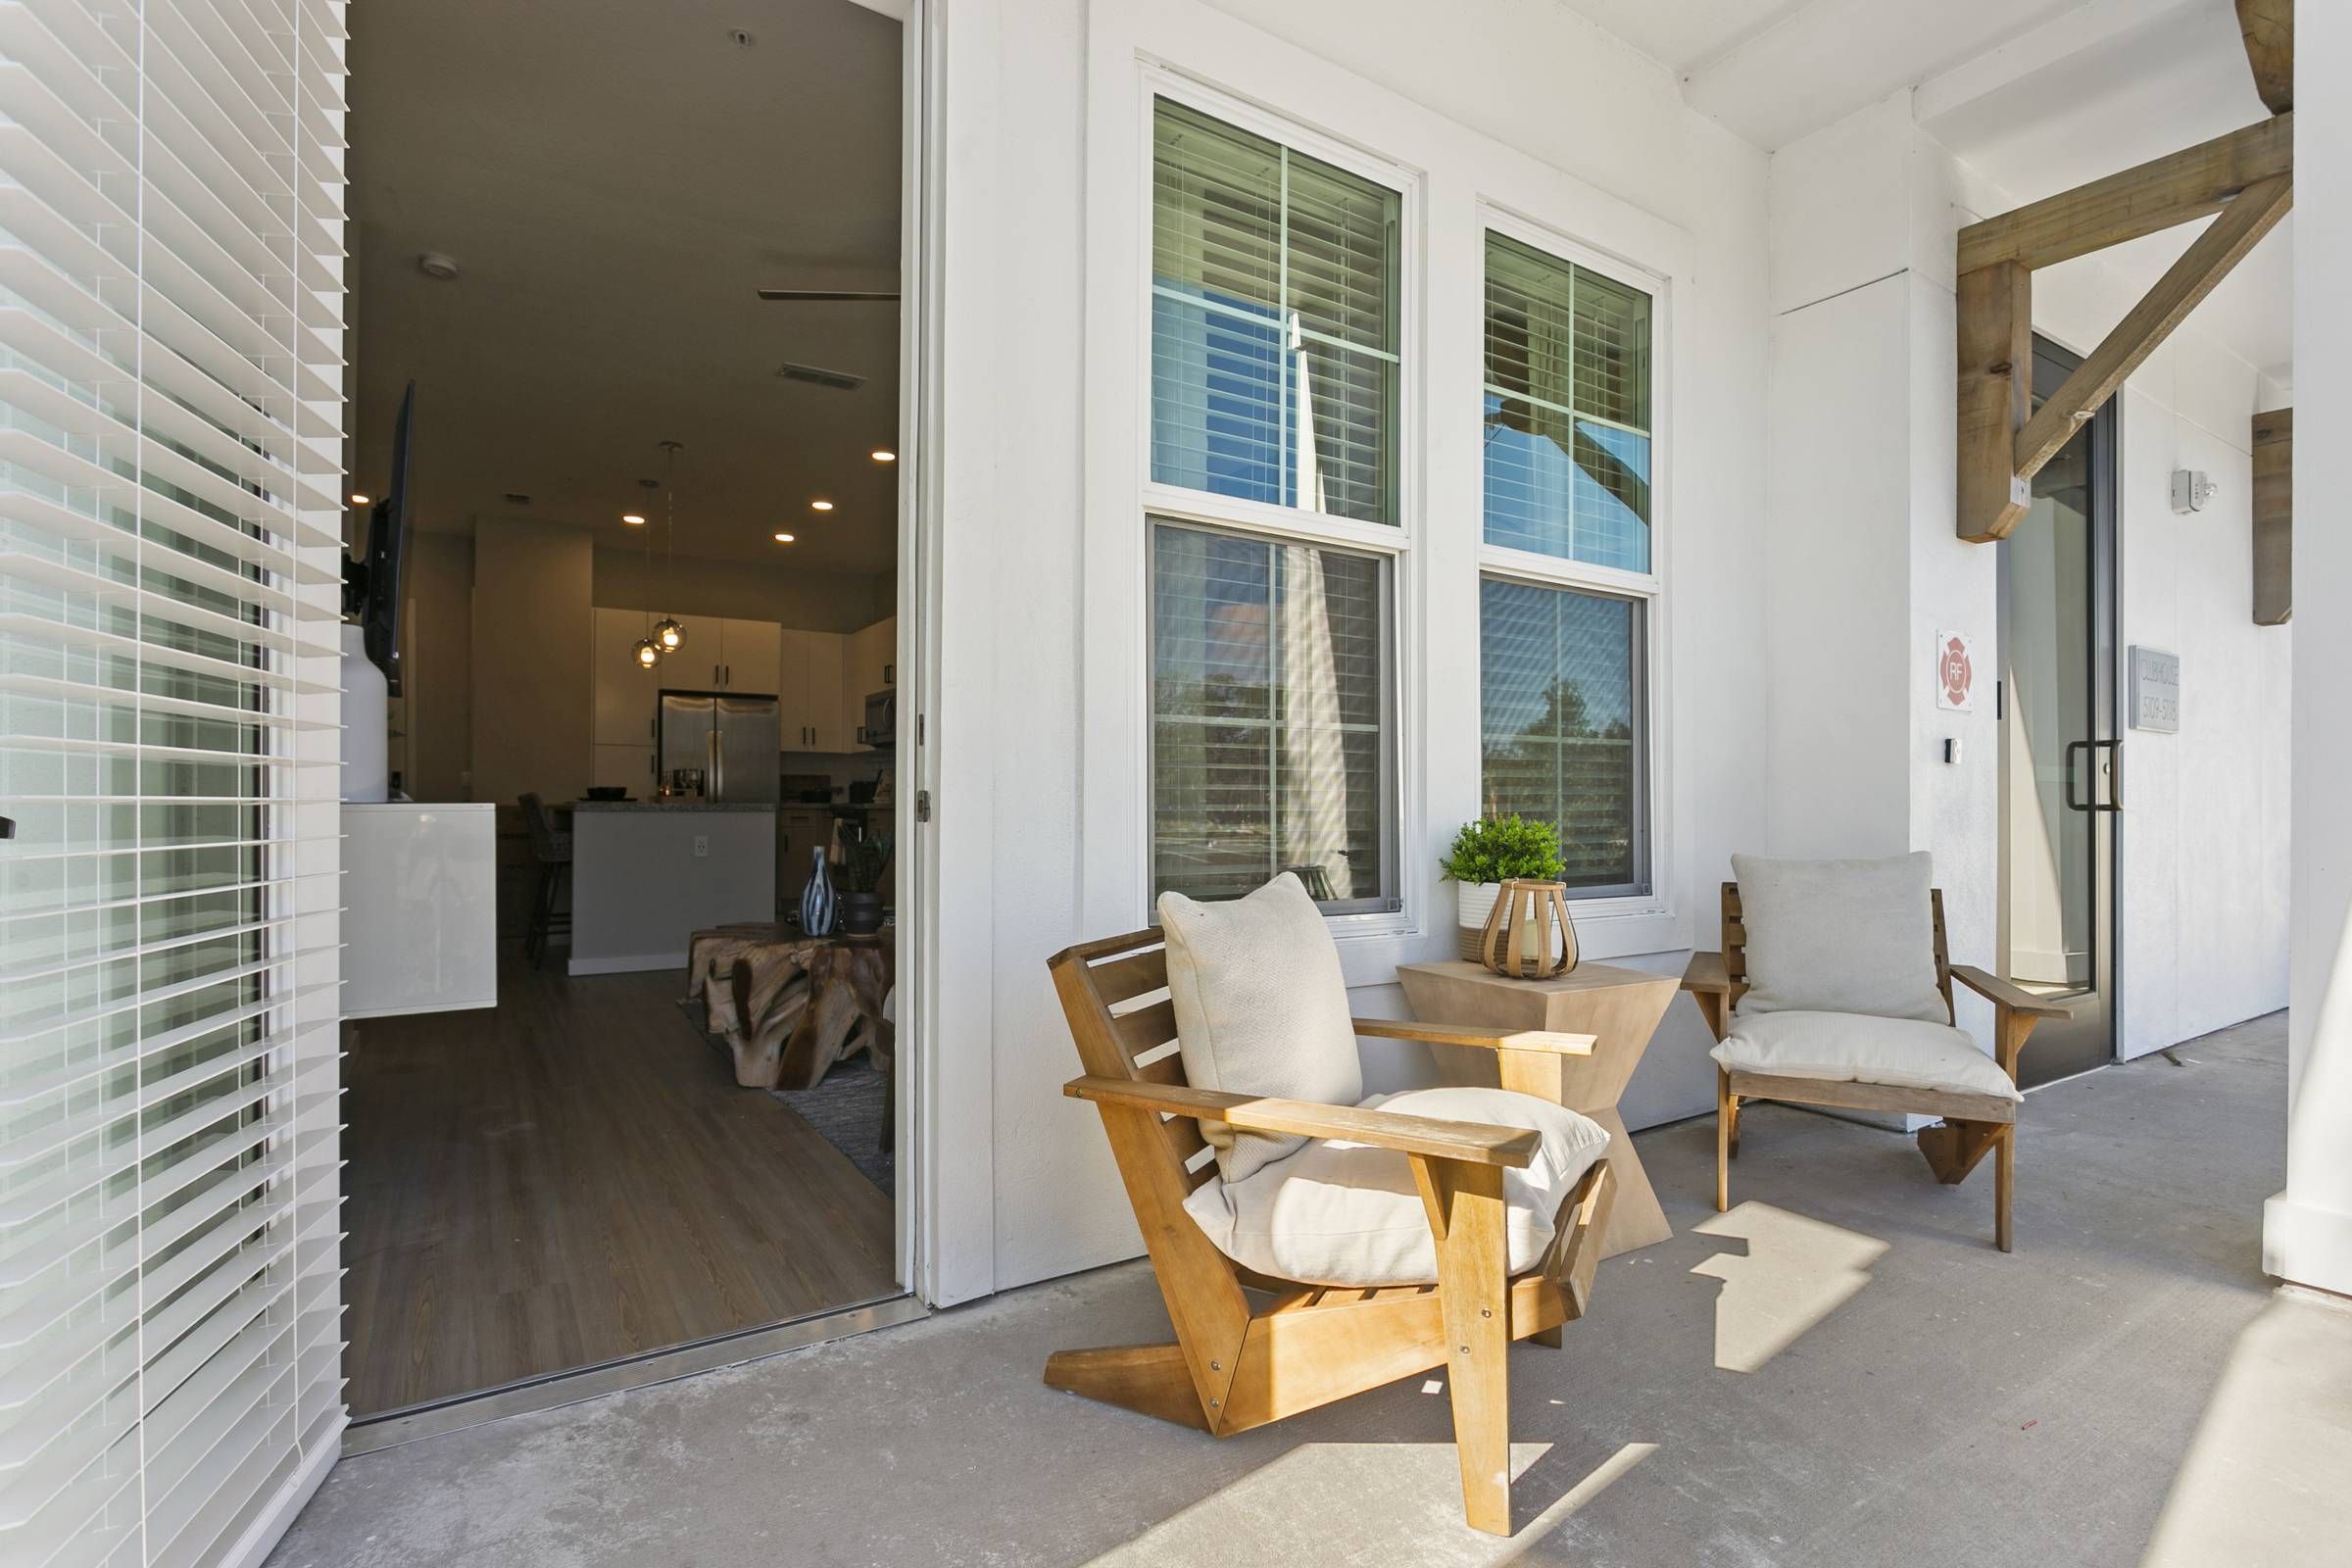 The entrance to the Alta Belleair property showcases a welcoming porch with two wooden rocking chairs and an open door leading to a modern interior.